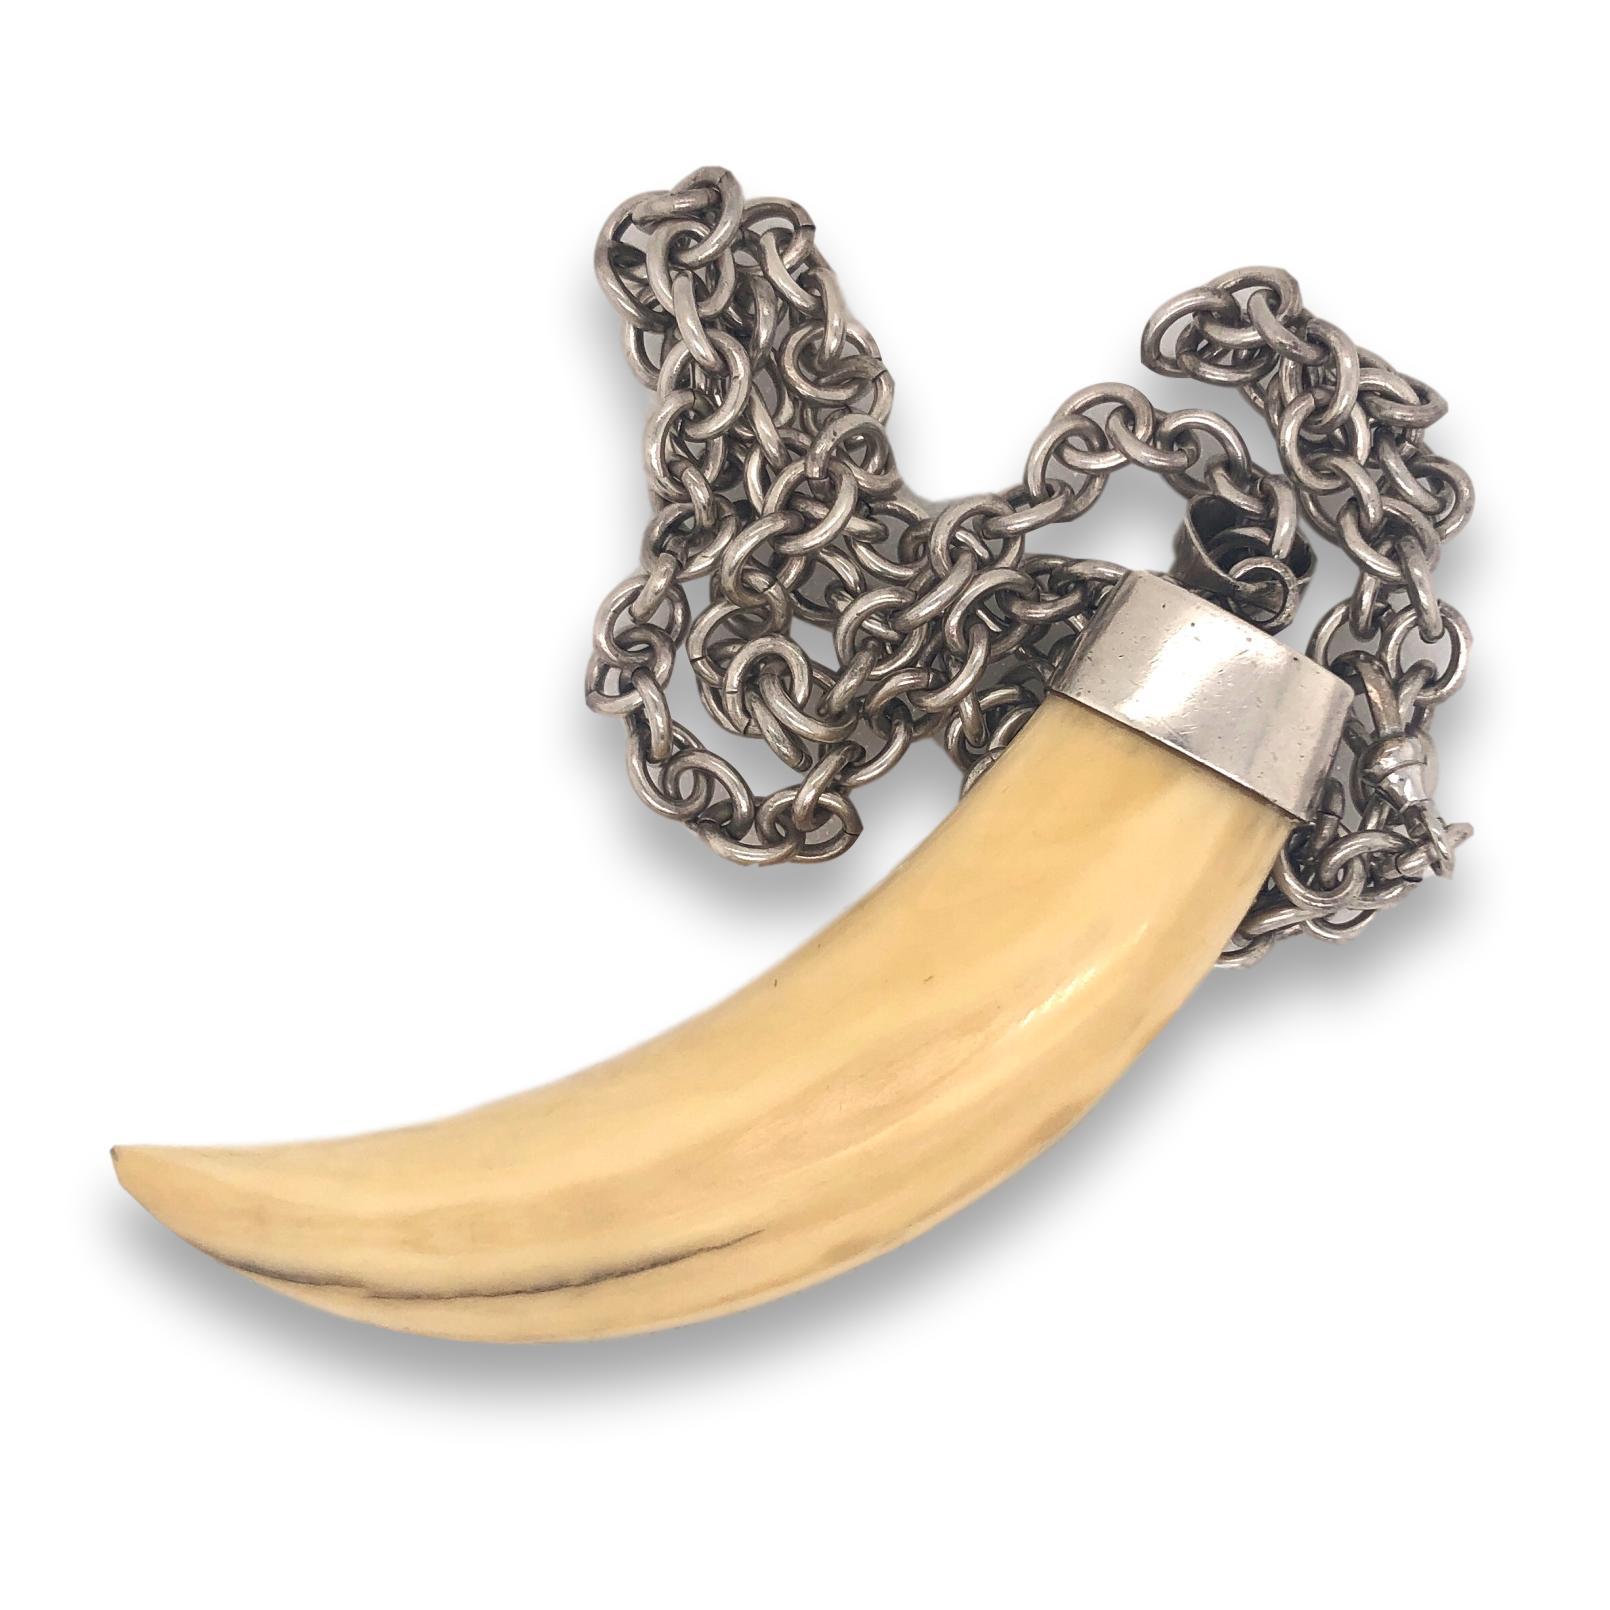 70's Boars tusk bone pendant necklace. The large 4